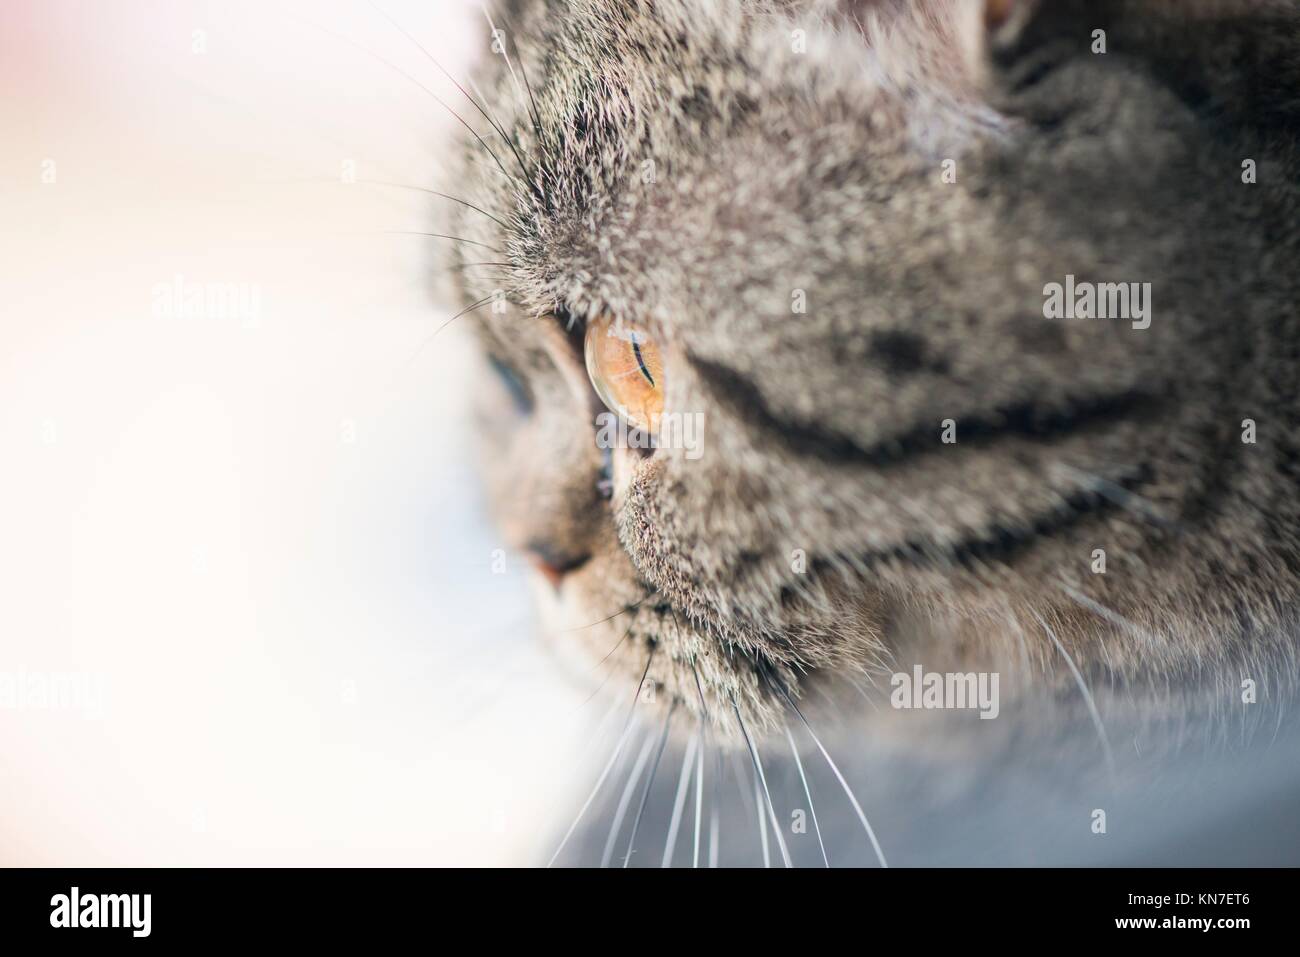 Curious cat looking out of window. Extreme close up of face. Stock Photo